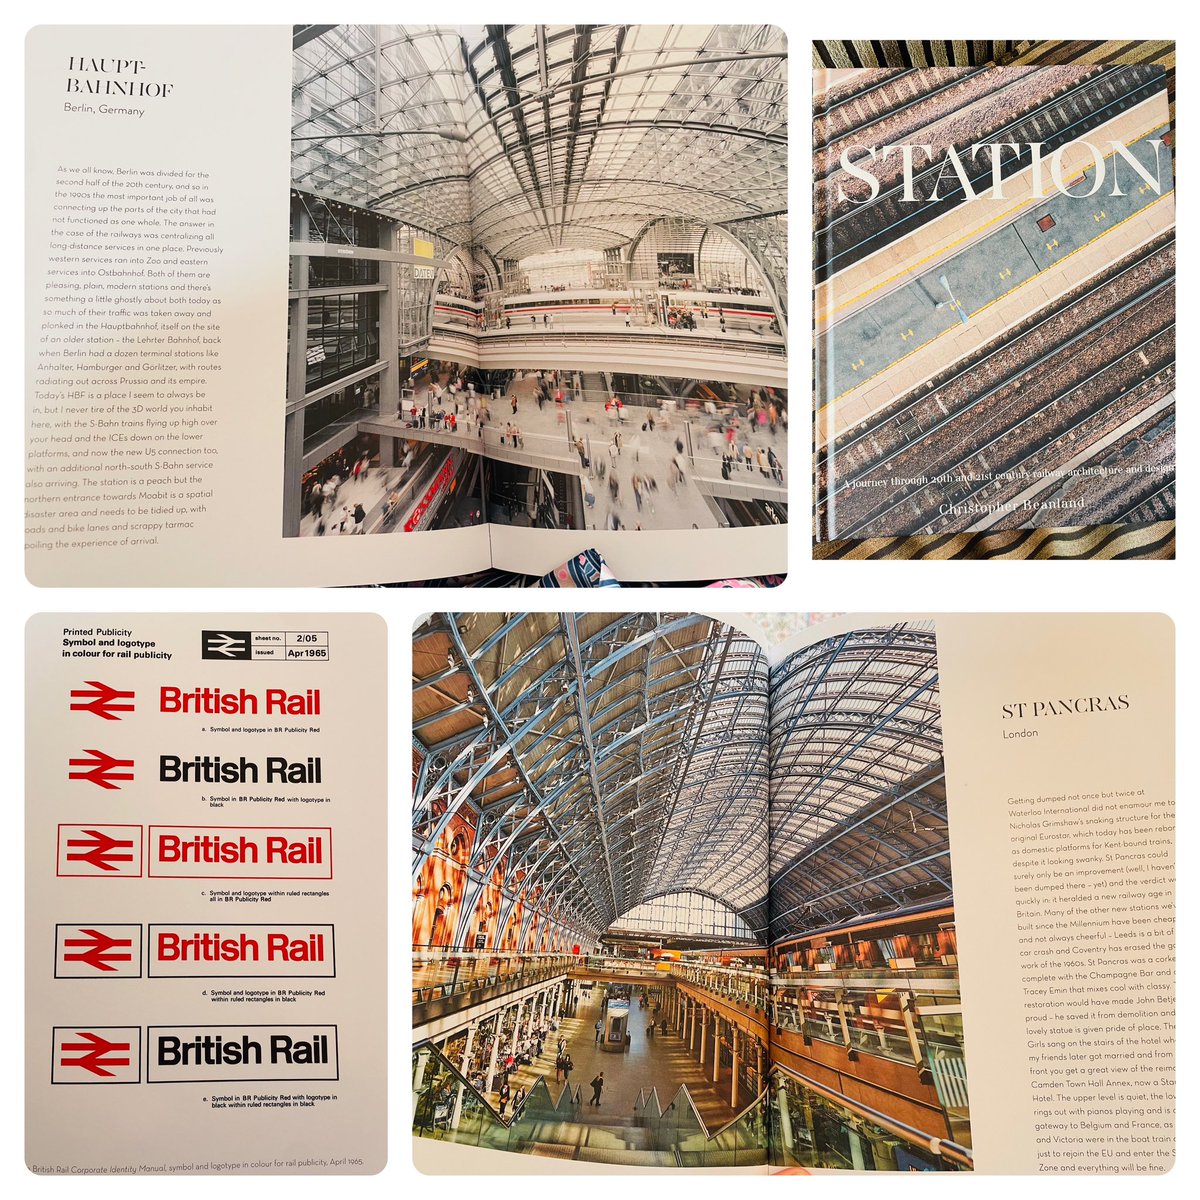 An absolutely fabulous birthday, but a really standout gift was the ‘Station’ book by @ChrisBeanland from my parents - a beautiful yomp through 20th/21st century #railway stations 🚆